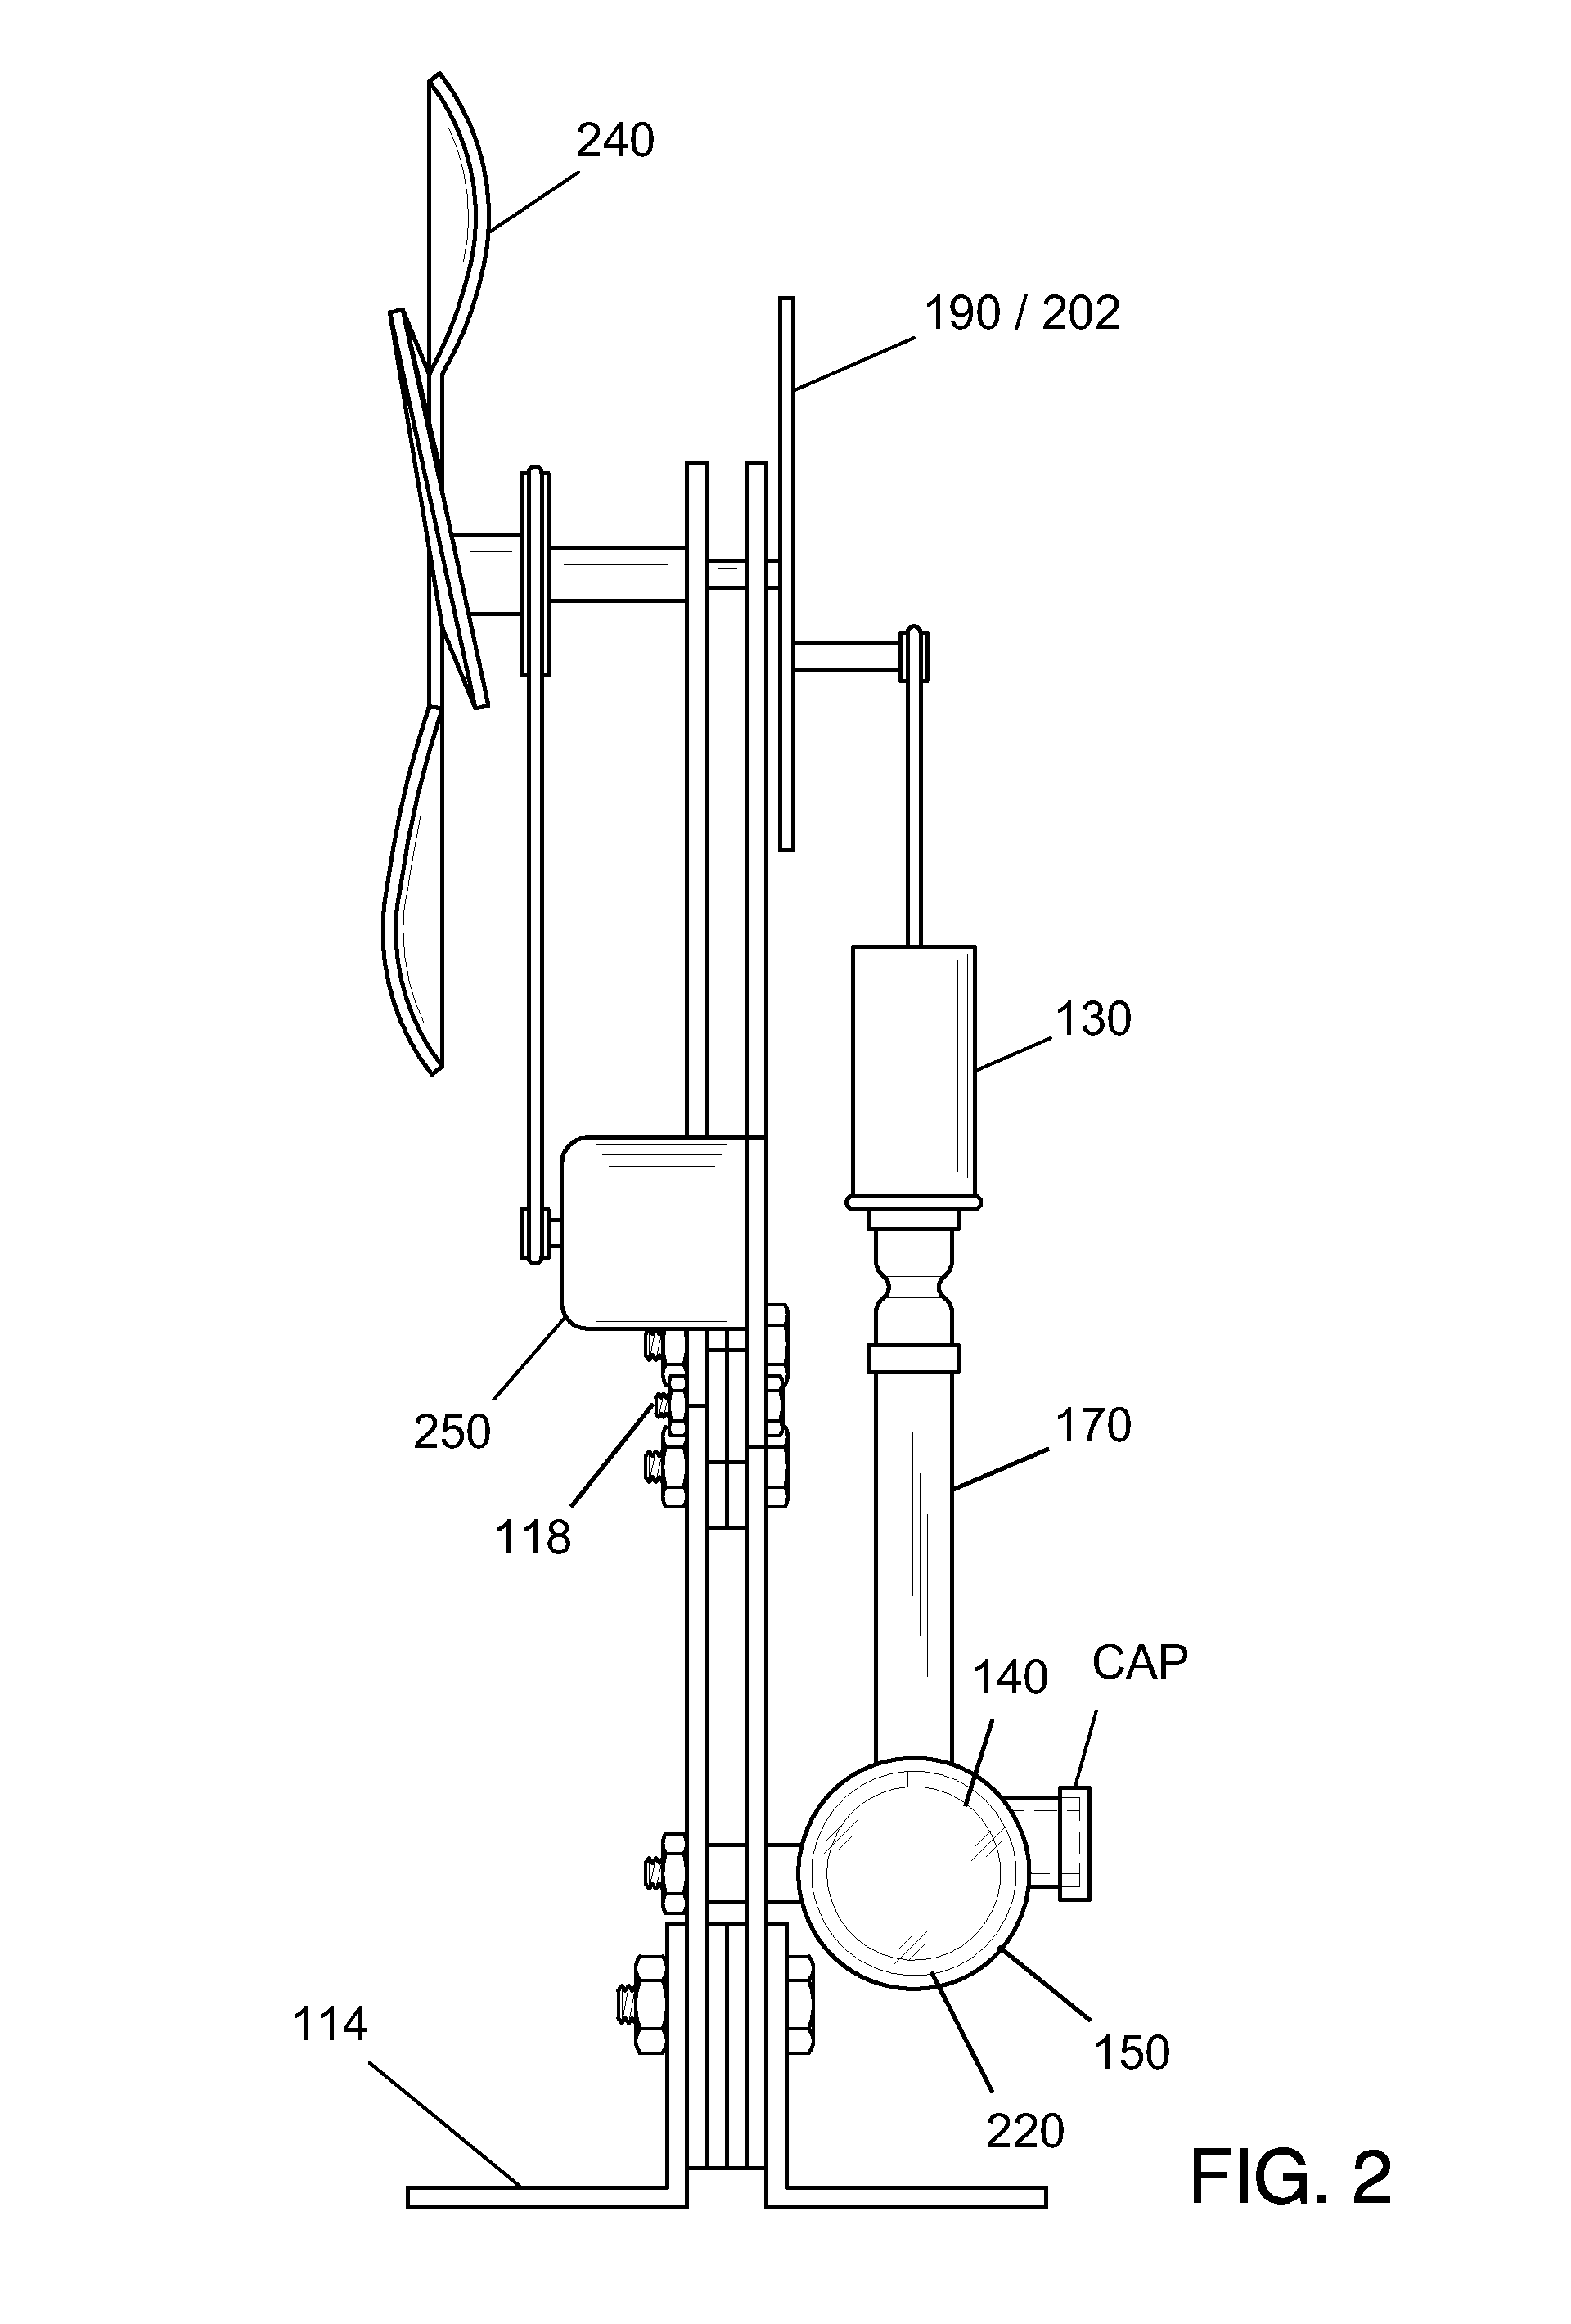 Directionally reversible hot air engine system